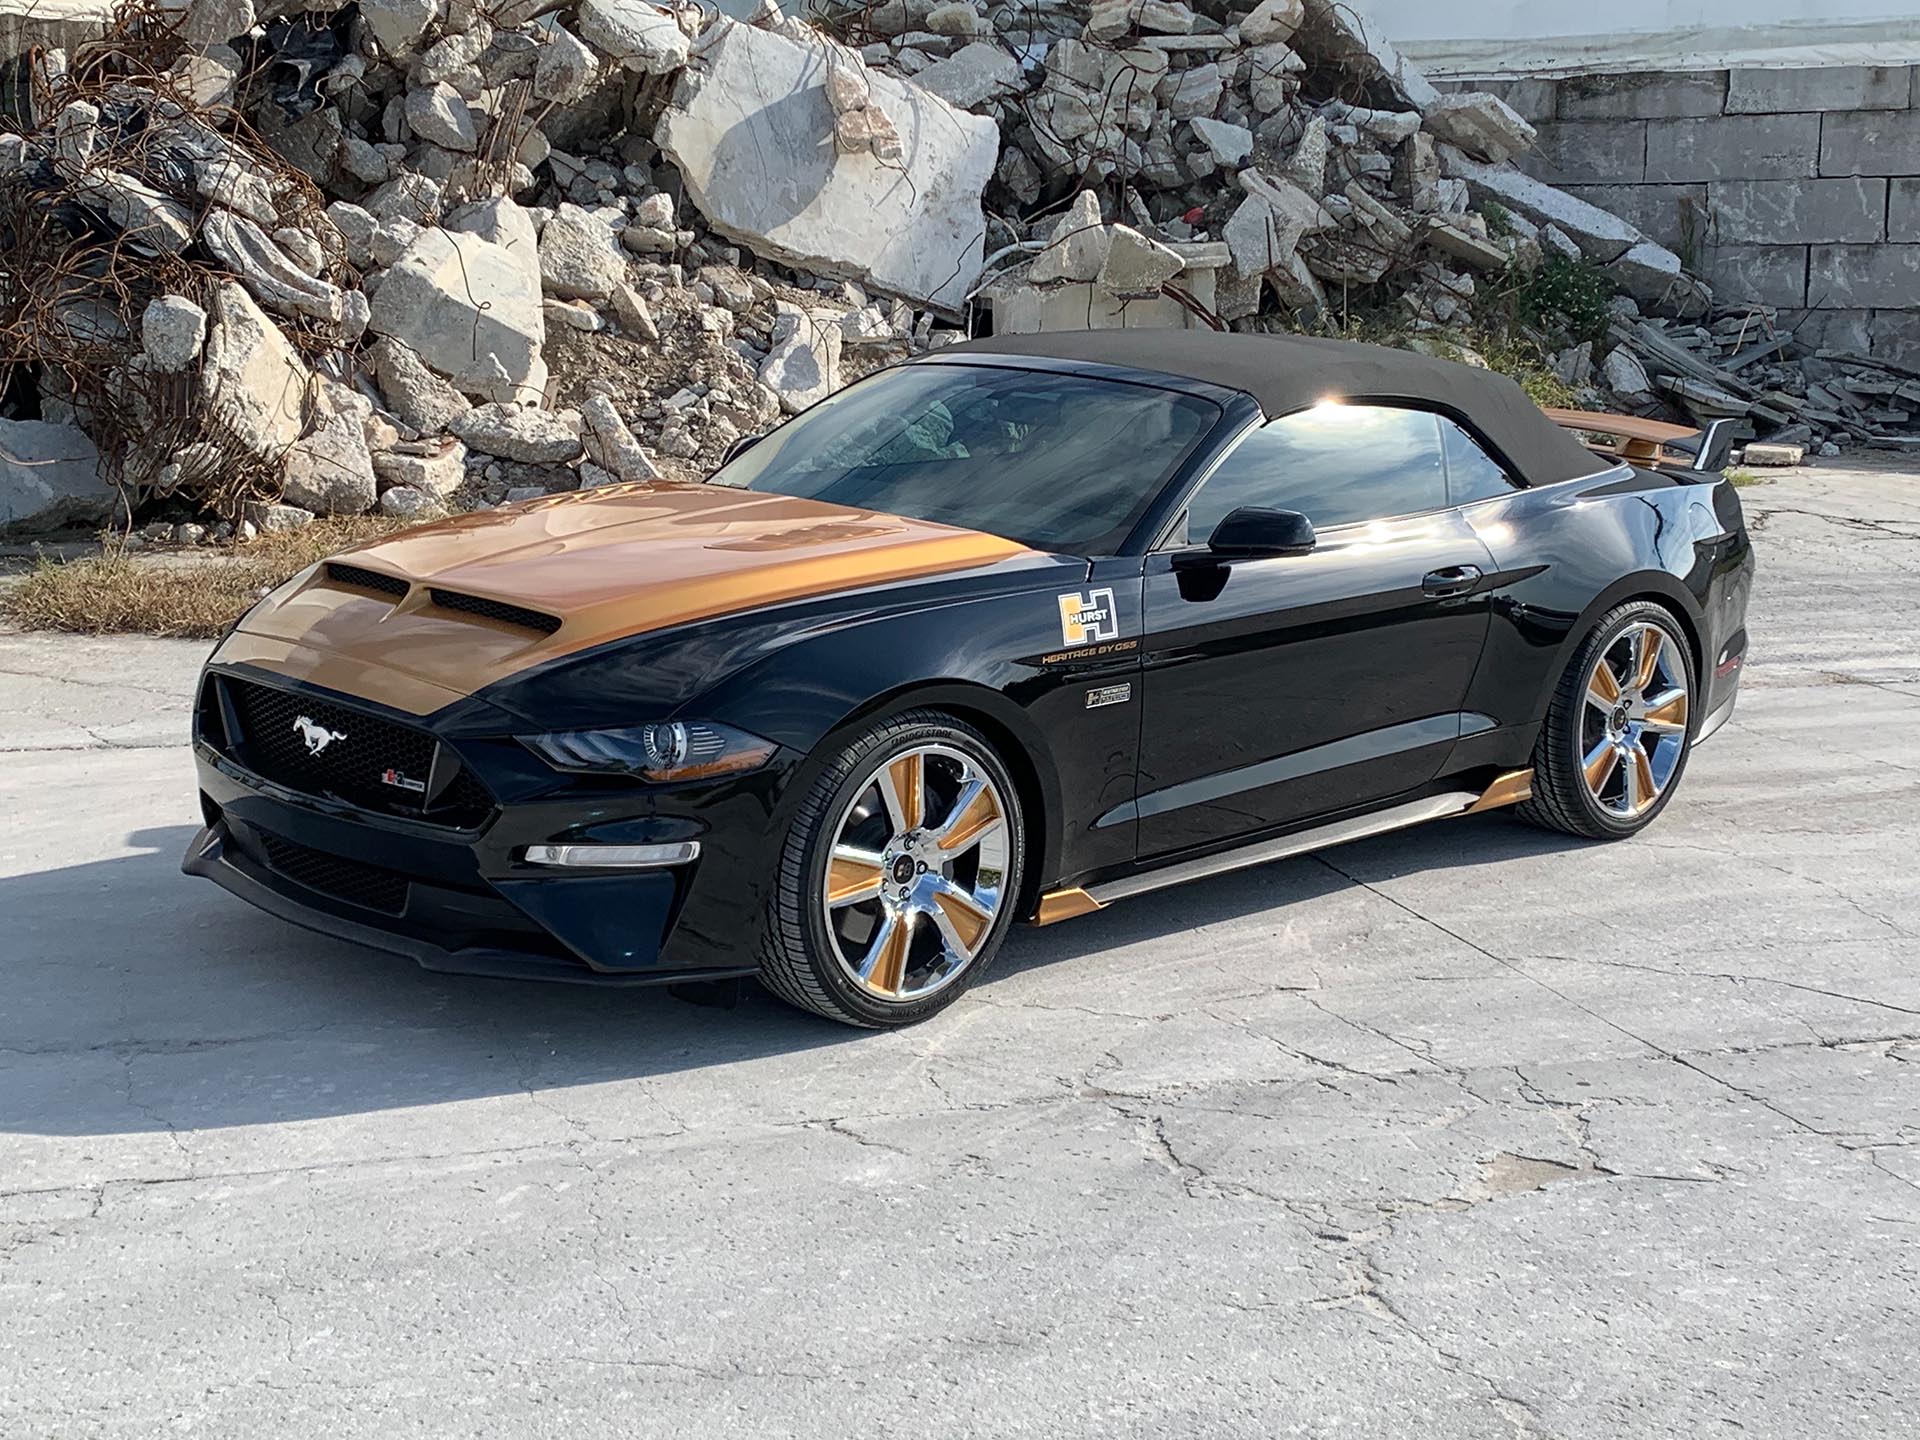 2019 Ford Mustang GT Convertible Hurst Prototype by GSS Supercars